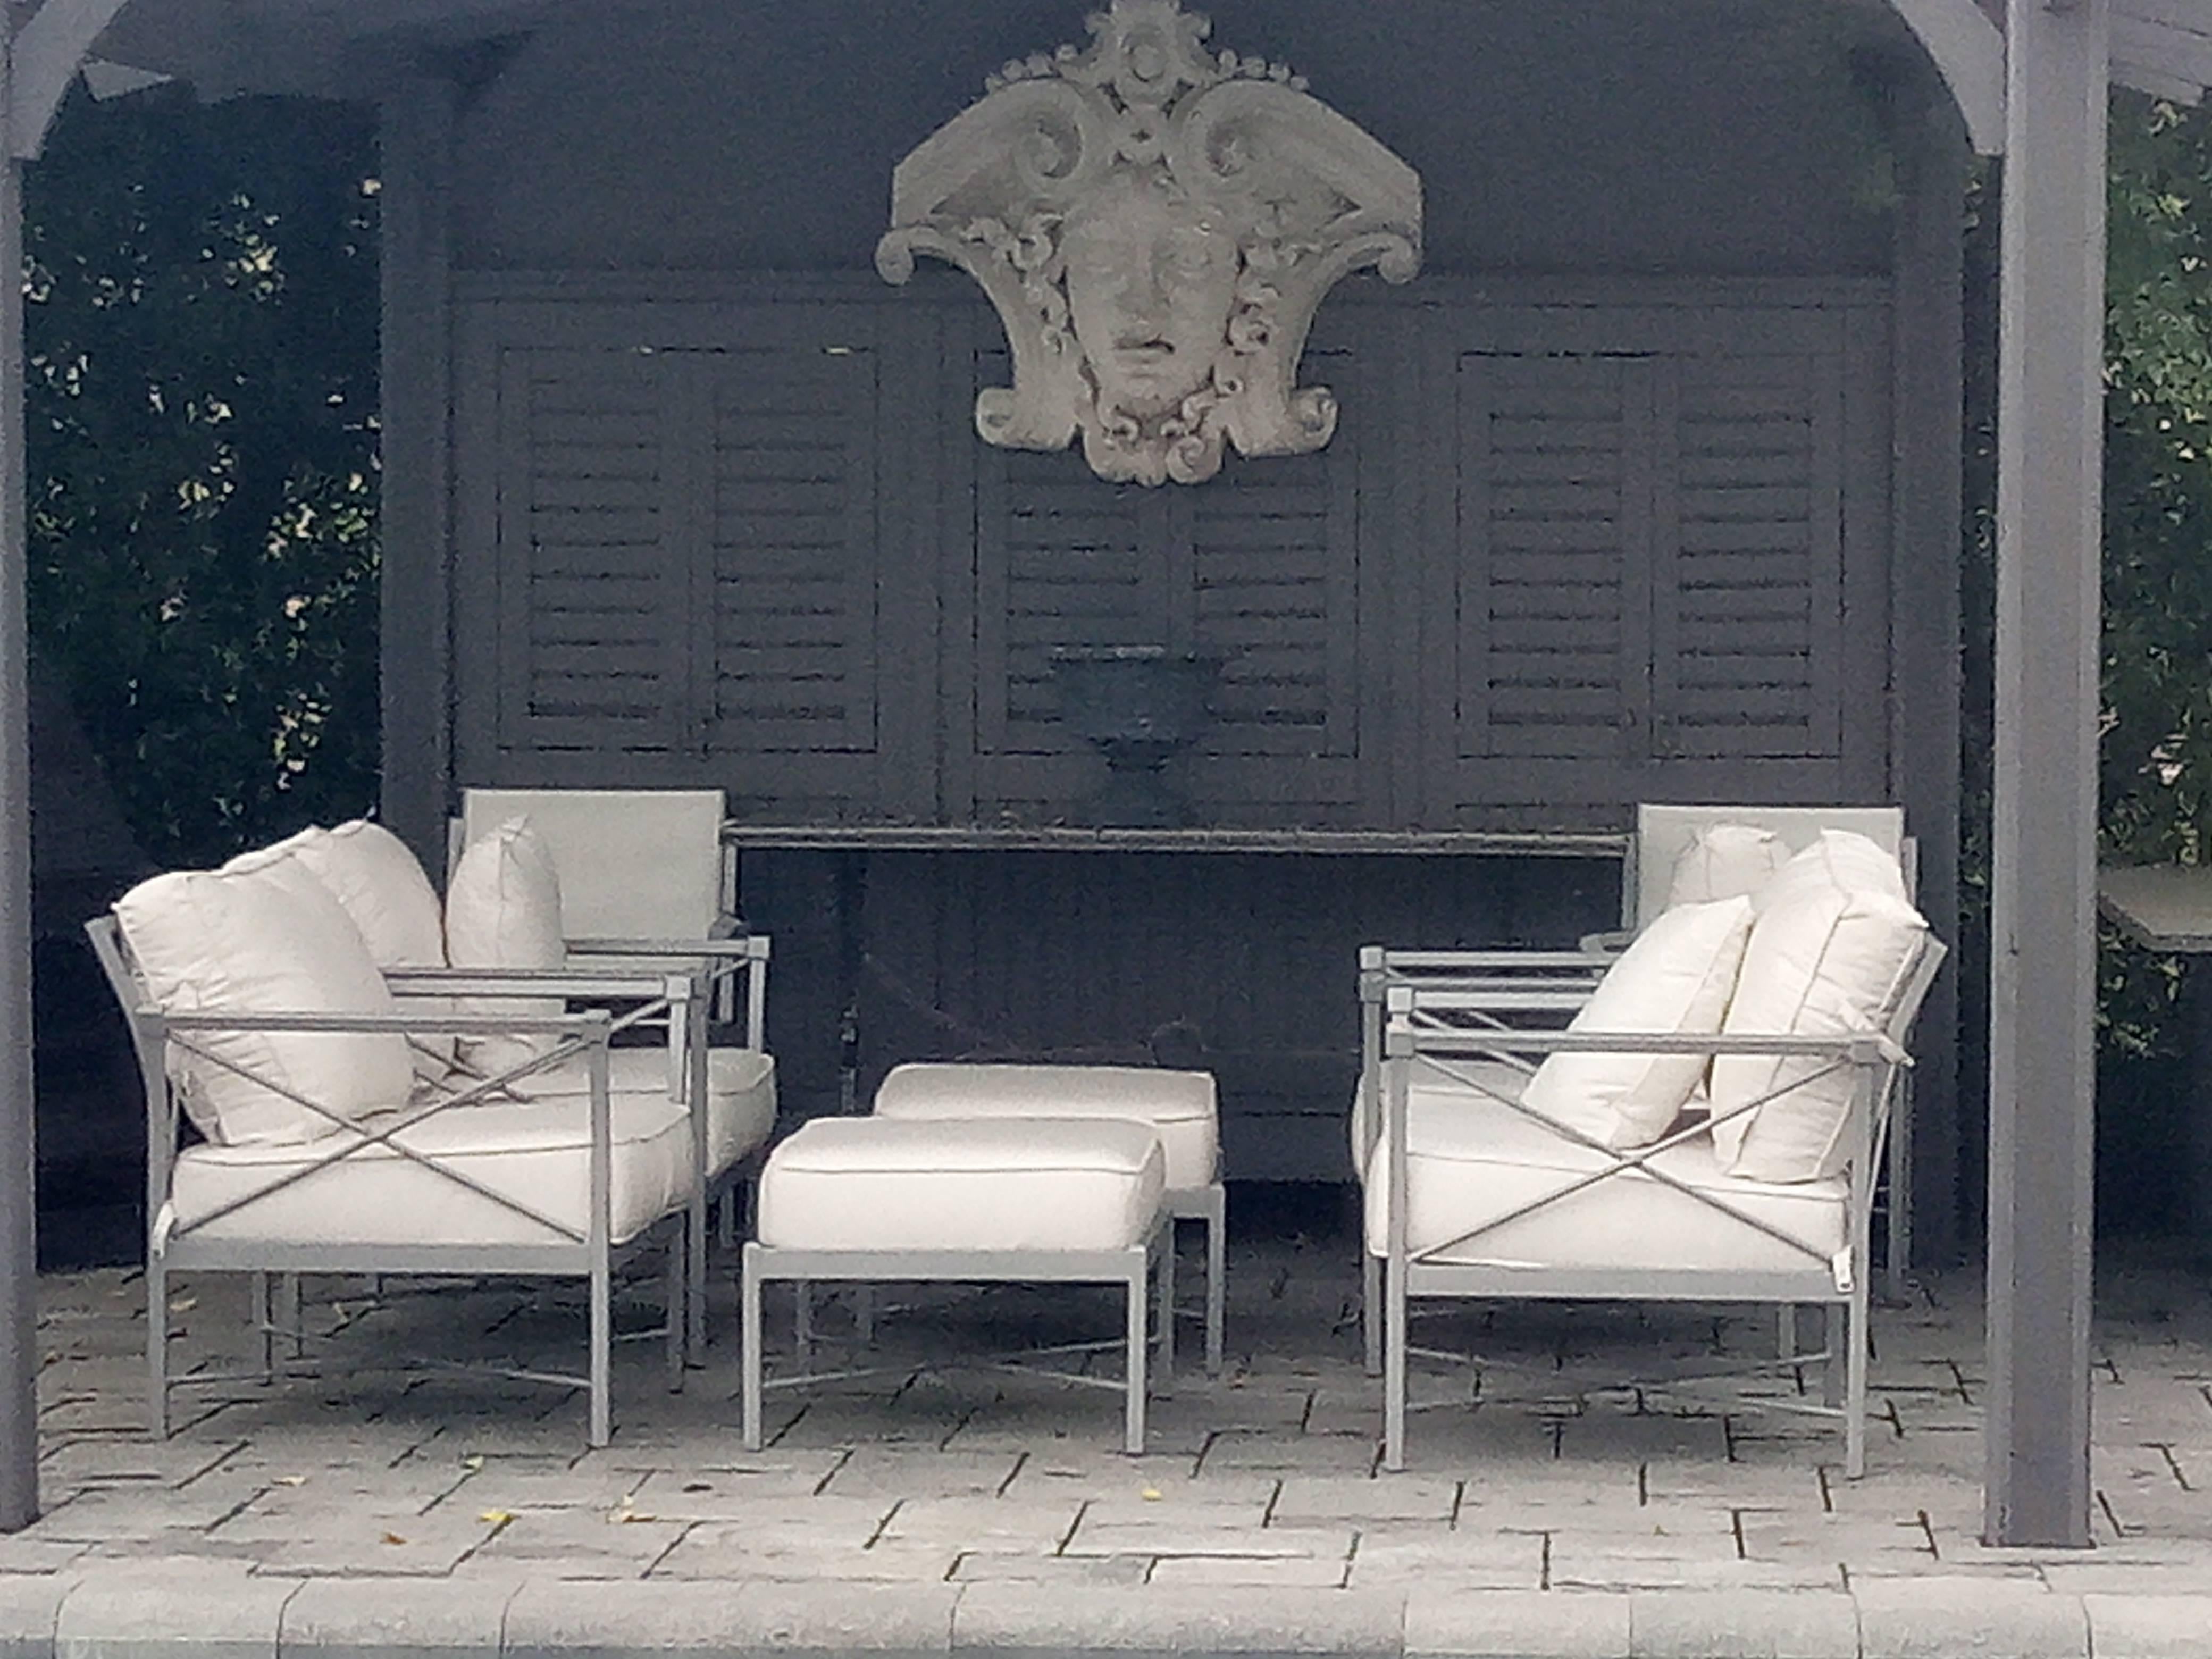 Create a chic luxury garden setting on your patio or terrace!

Midcentury Modern 6 piece set of lounge chairs-this is part of a larger set of 16 piece total- superb stylish pavilion aluminum garden furniture-
Four comfy thick cushion lounge chairs